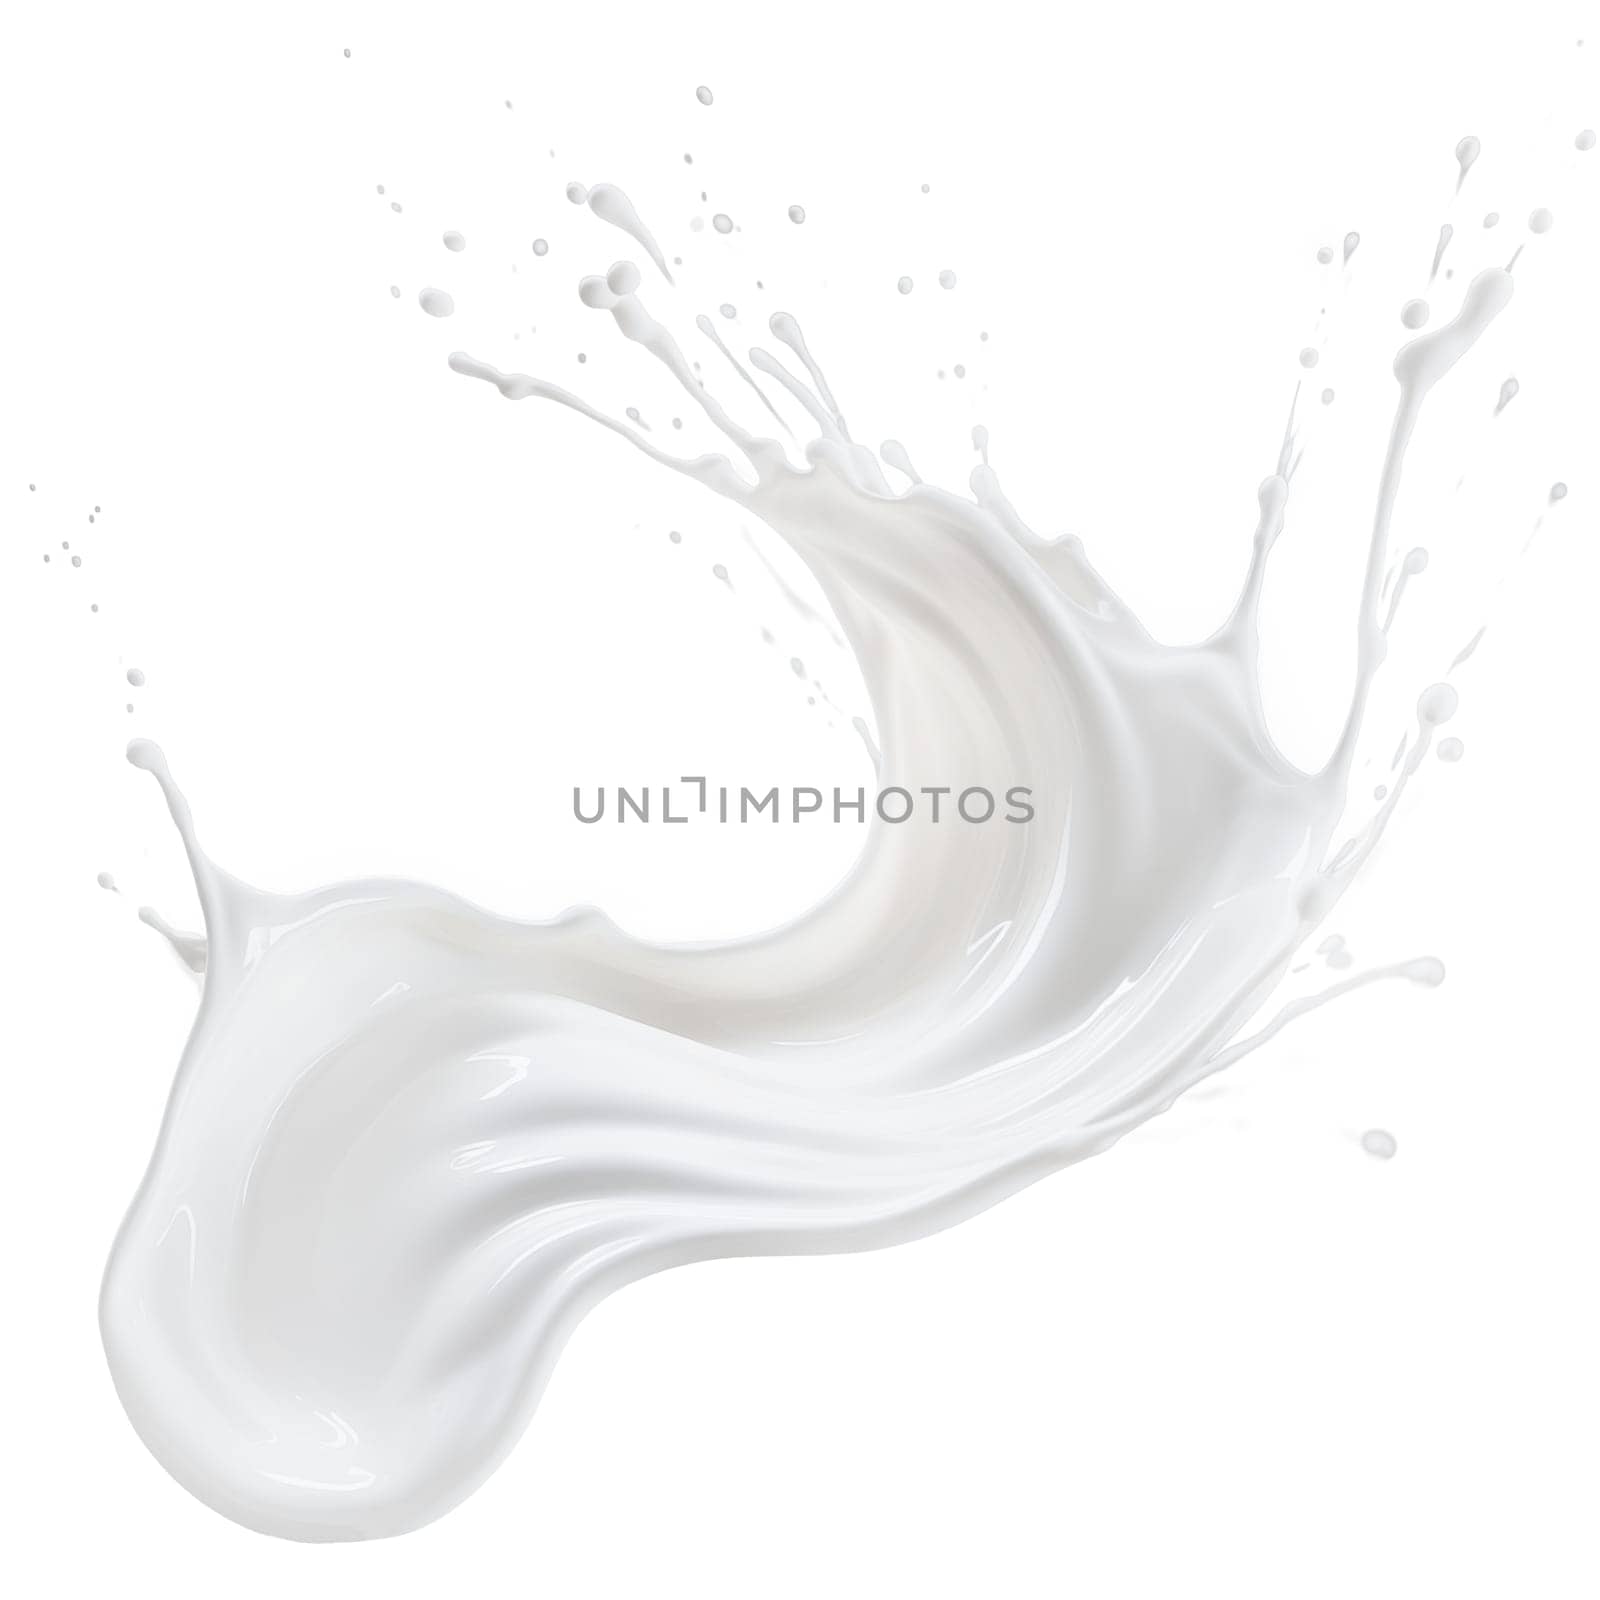 Milk splashes isolated on transparent background. Milk splashes and drops flying in different directions isolated on a white background. Splashes of white liquid. High quality photo